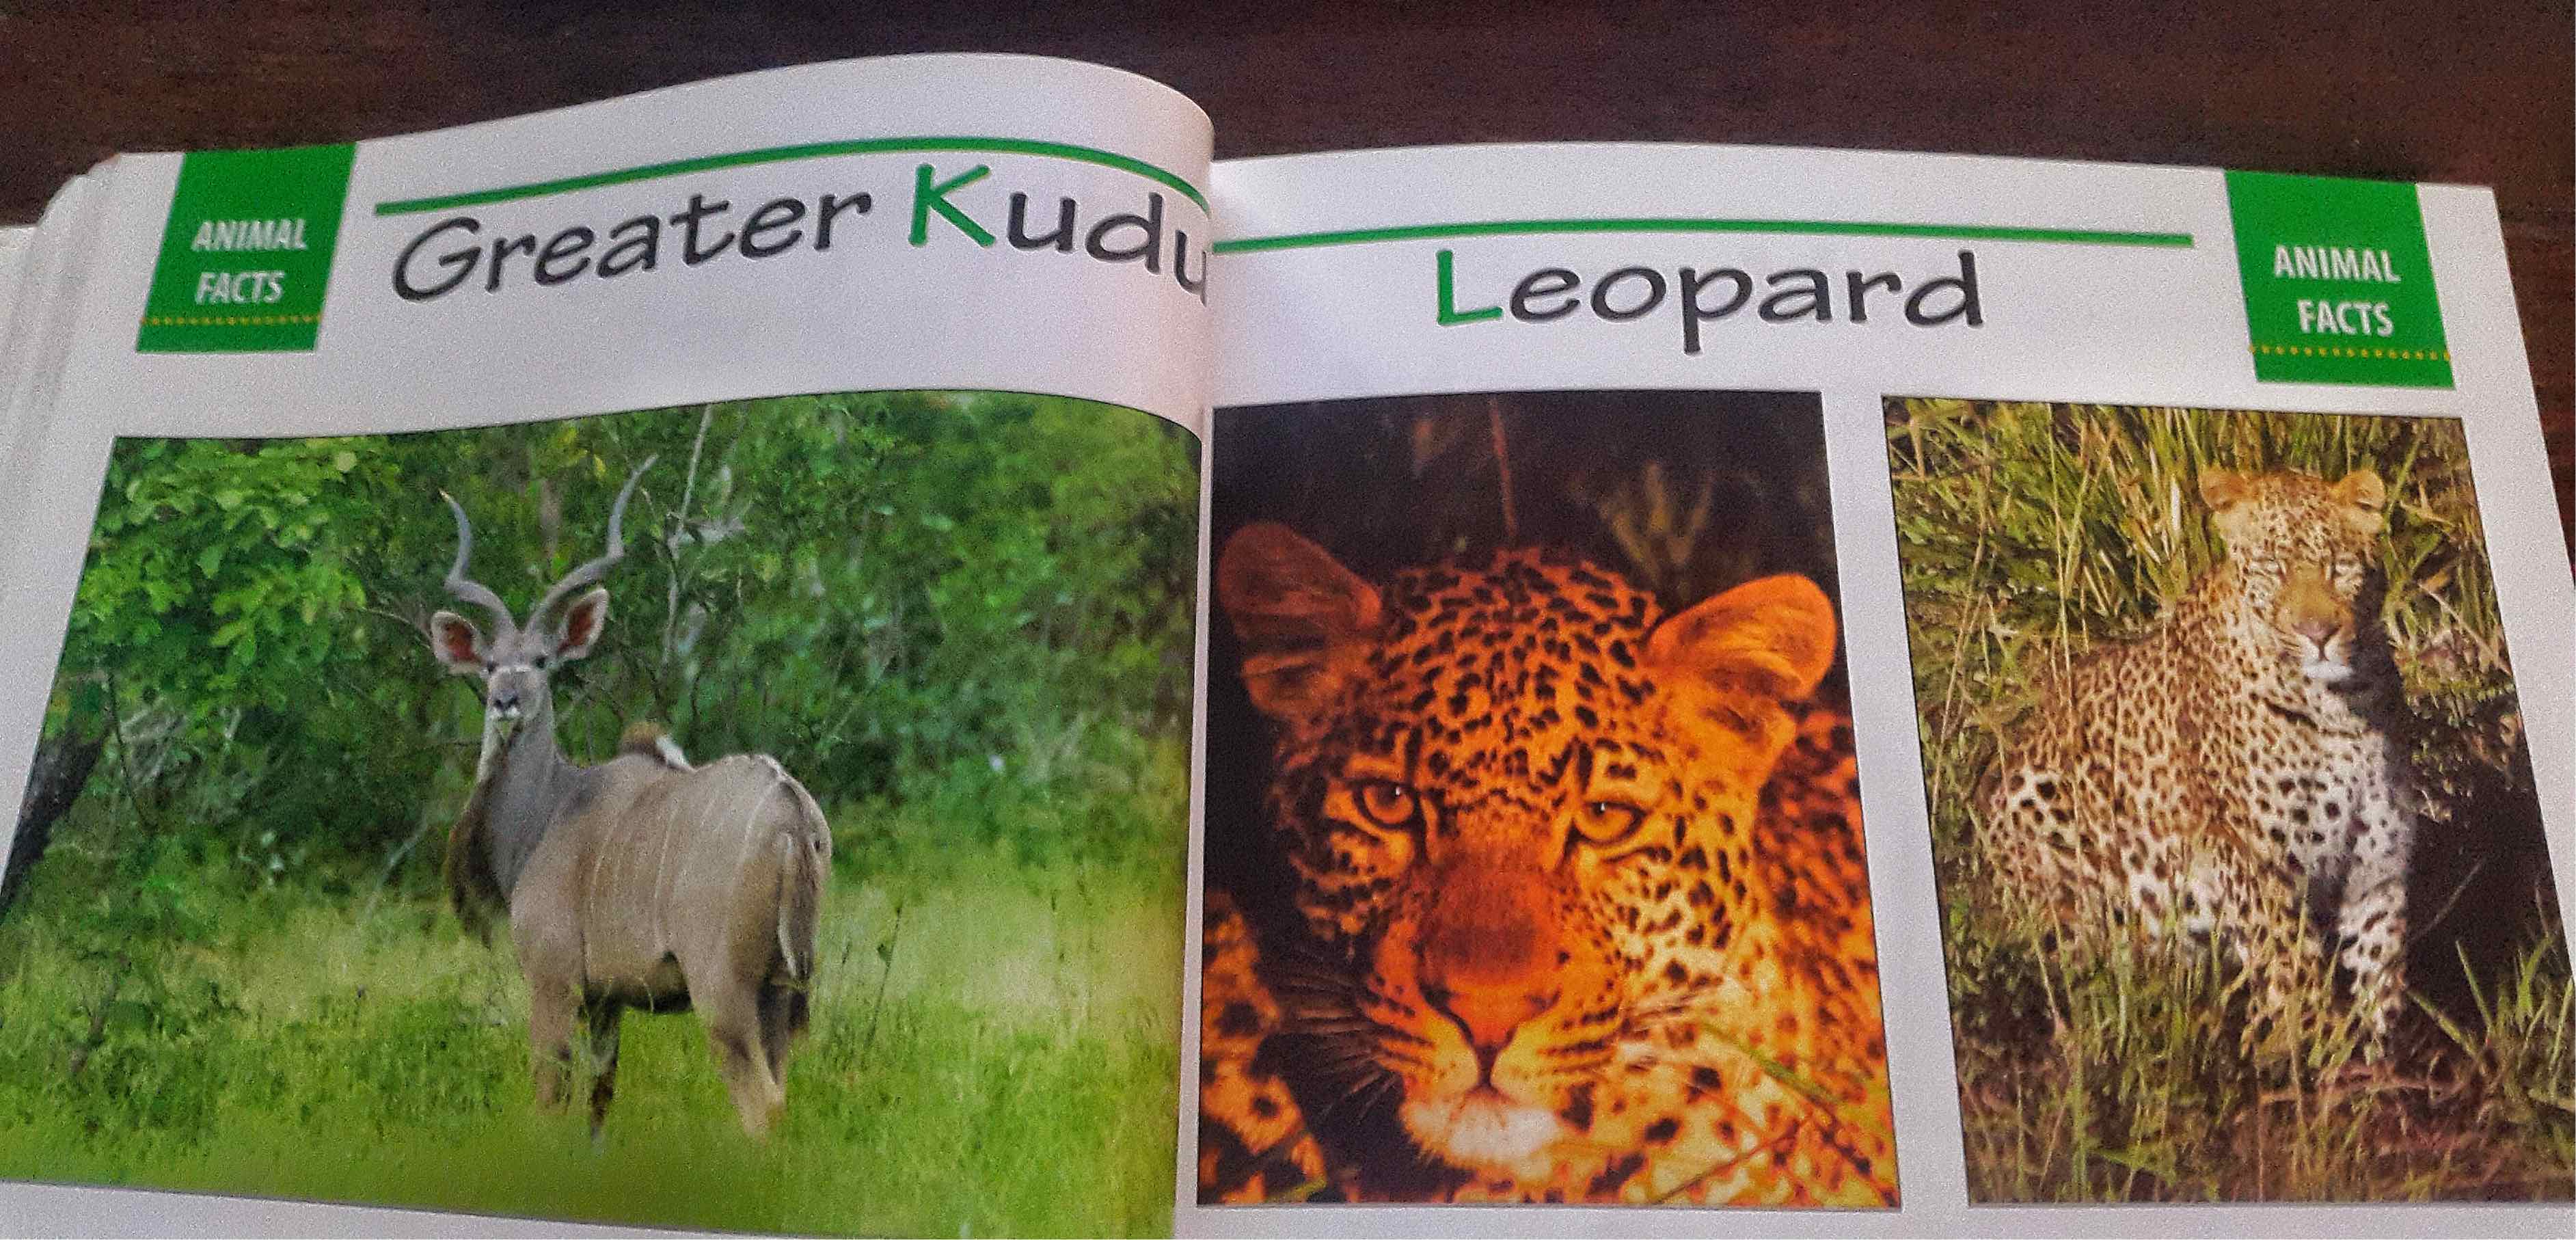 From The Sobo Guide to Malawi's Mammals